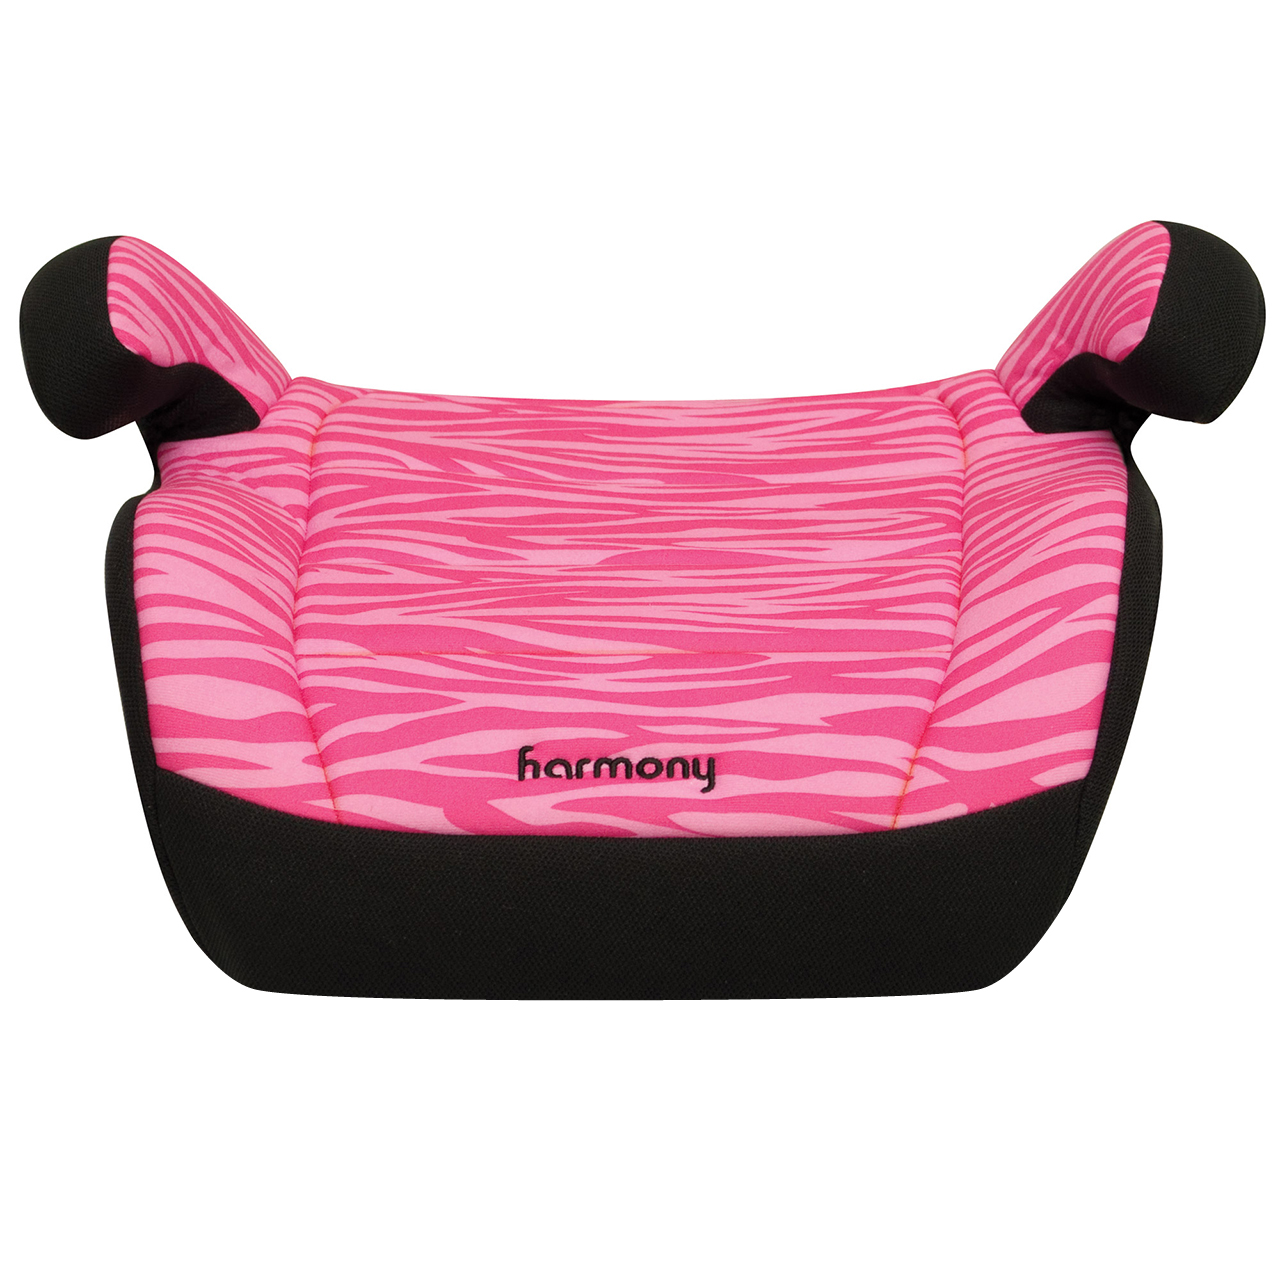 Harmony Juvenile Youth Backless Booster Car Seat, Pink Zebra - image 2 of 7